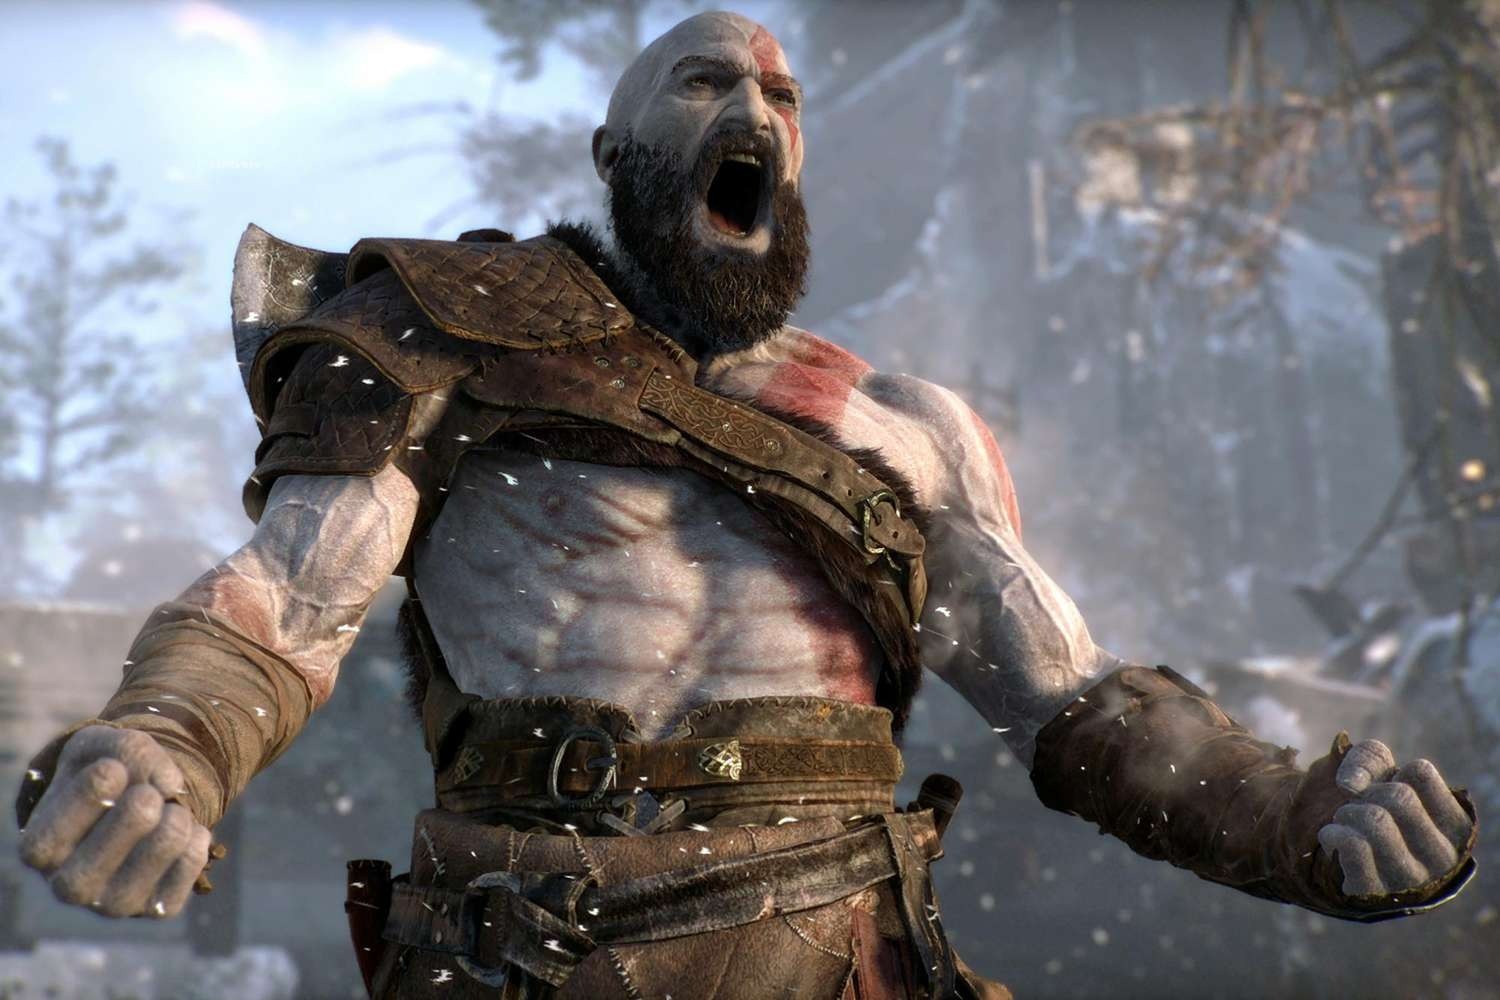 Kratos' journey in God of War makes his chacarter arc a fan favorite.